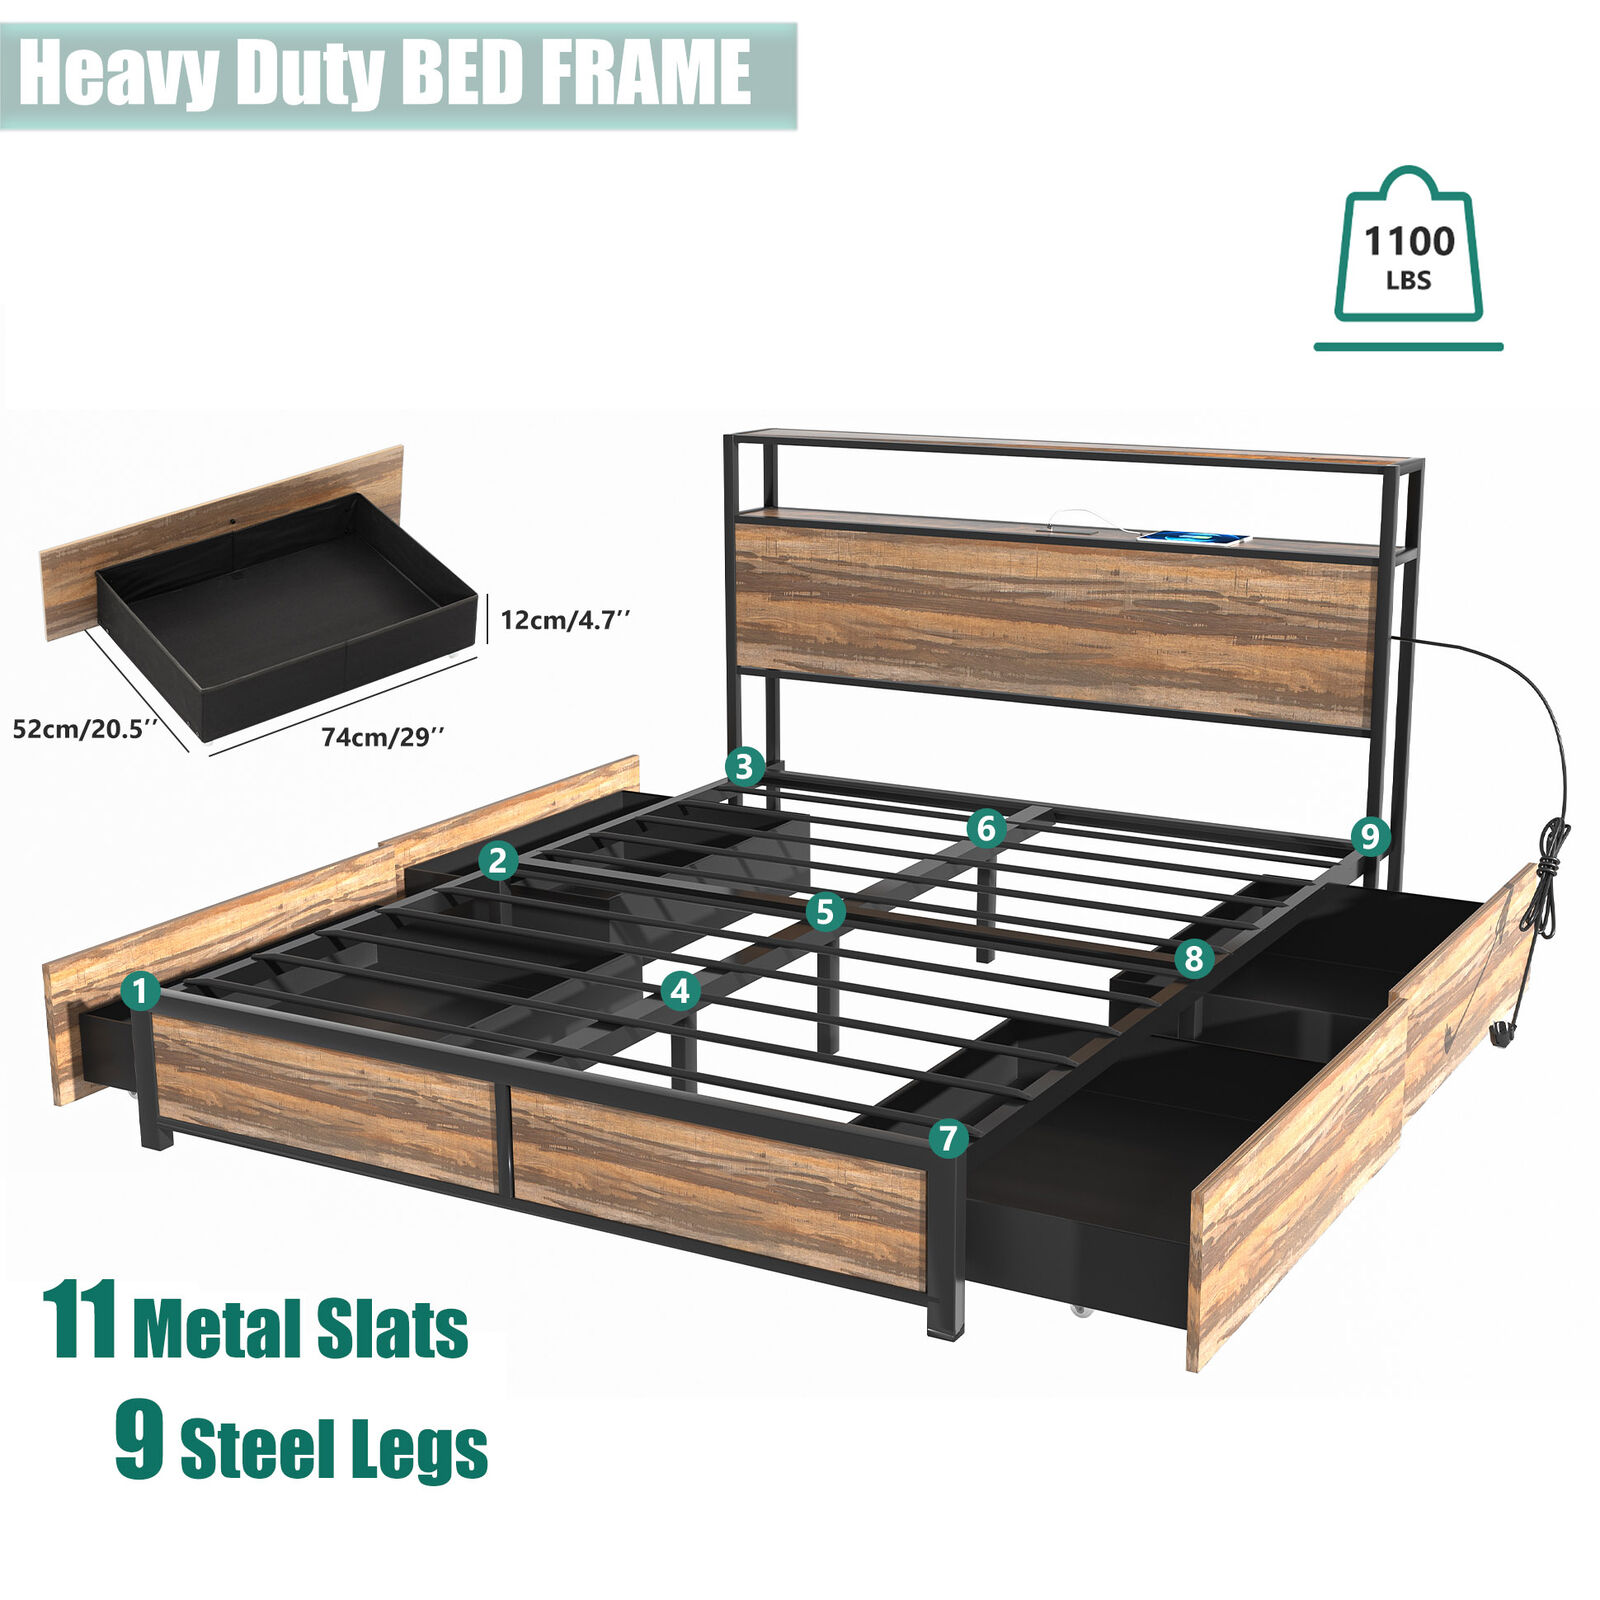 Full LED Bed Frame with Storage Headboard, 4 Drawers and Power Station, Industrial Metal Platform Bed with Power Charging Station & USB Ports (Tan-Full) - image 2 of 11